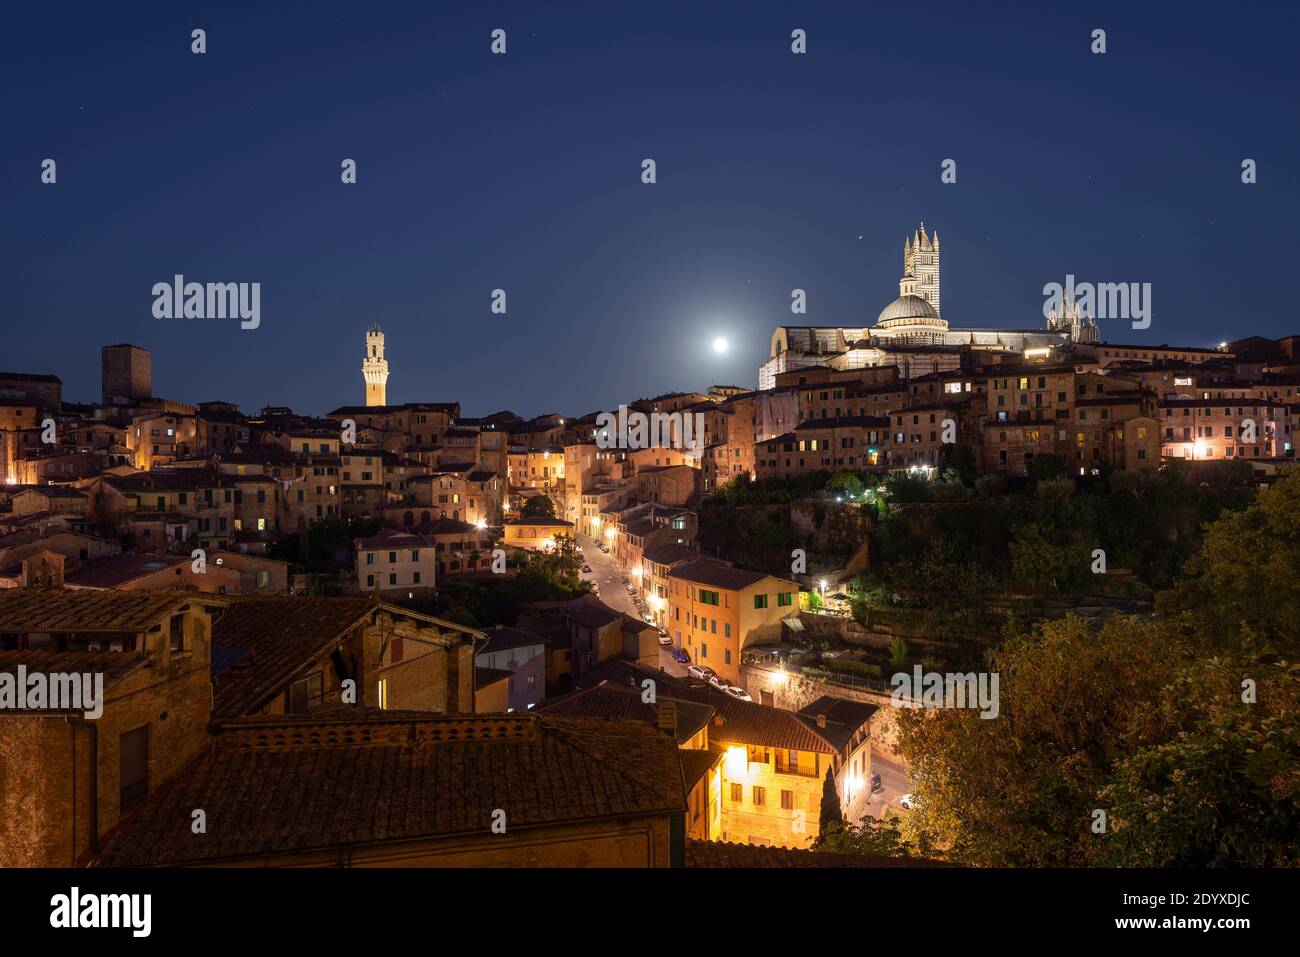 Full moon over an illuminated alley and the panorama of the medieval old town of Siena with the cathedral, town hall clock tower, Tuscany, Italy Stock Photo